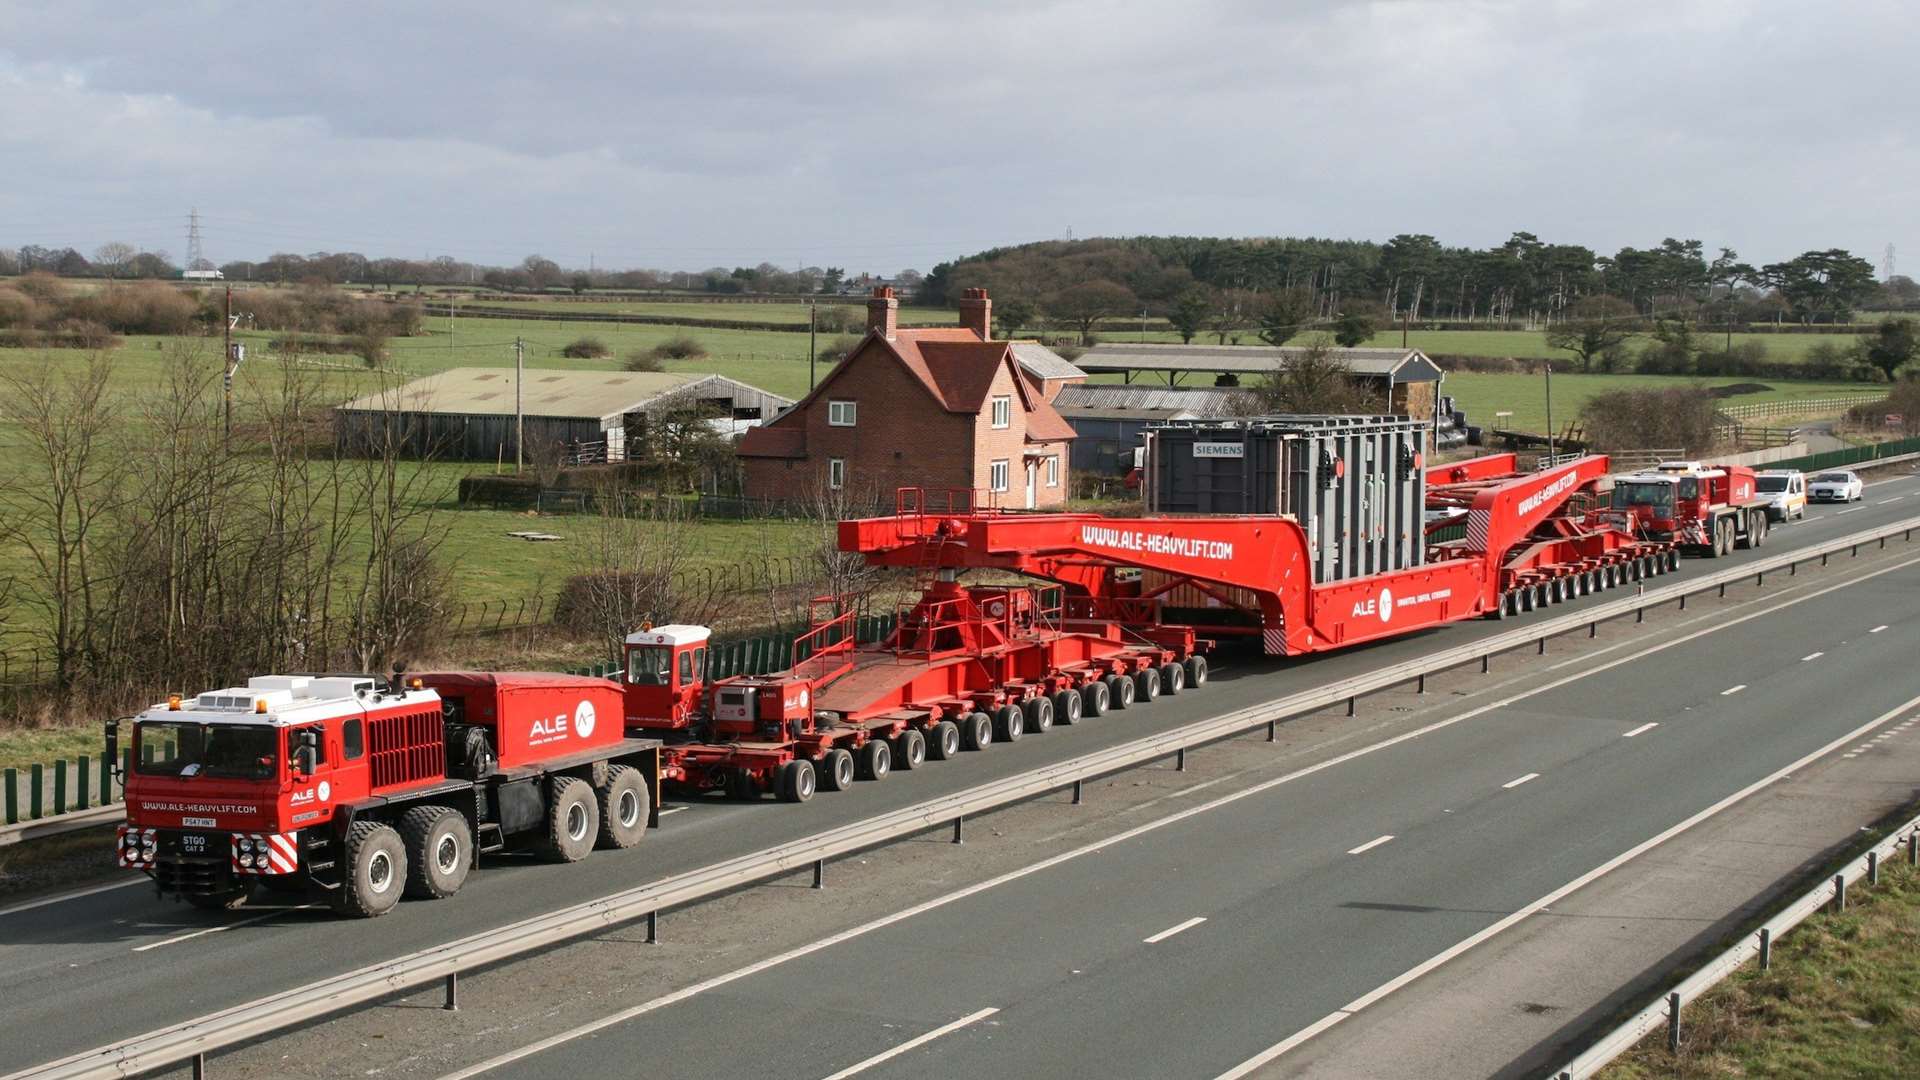 This huge house-sized transformer was moved from Sellindge to Dover en route to Germany for repairs in 2016